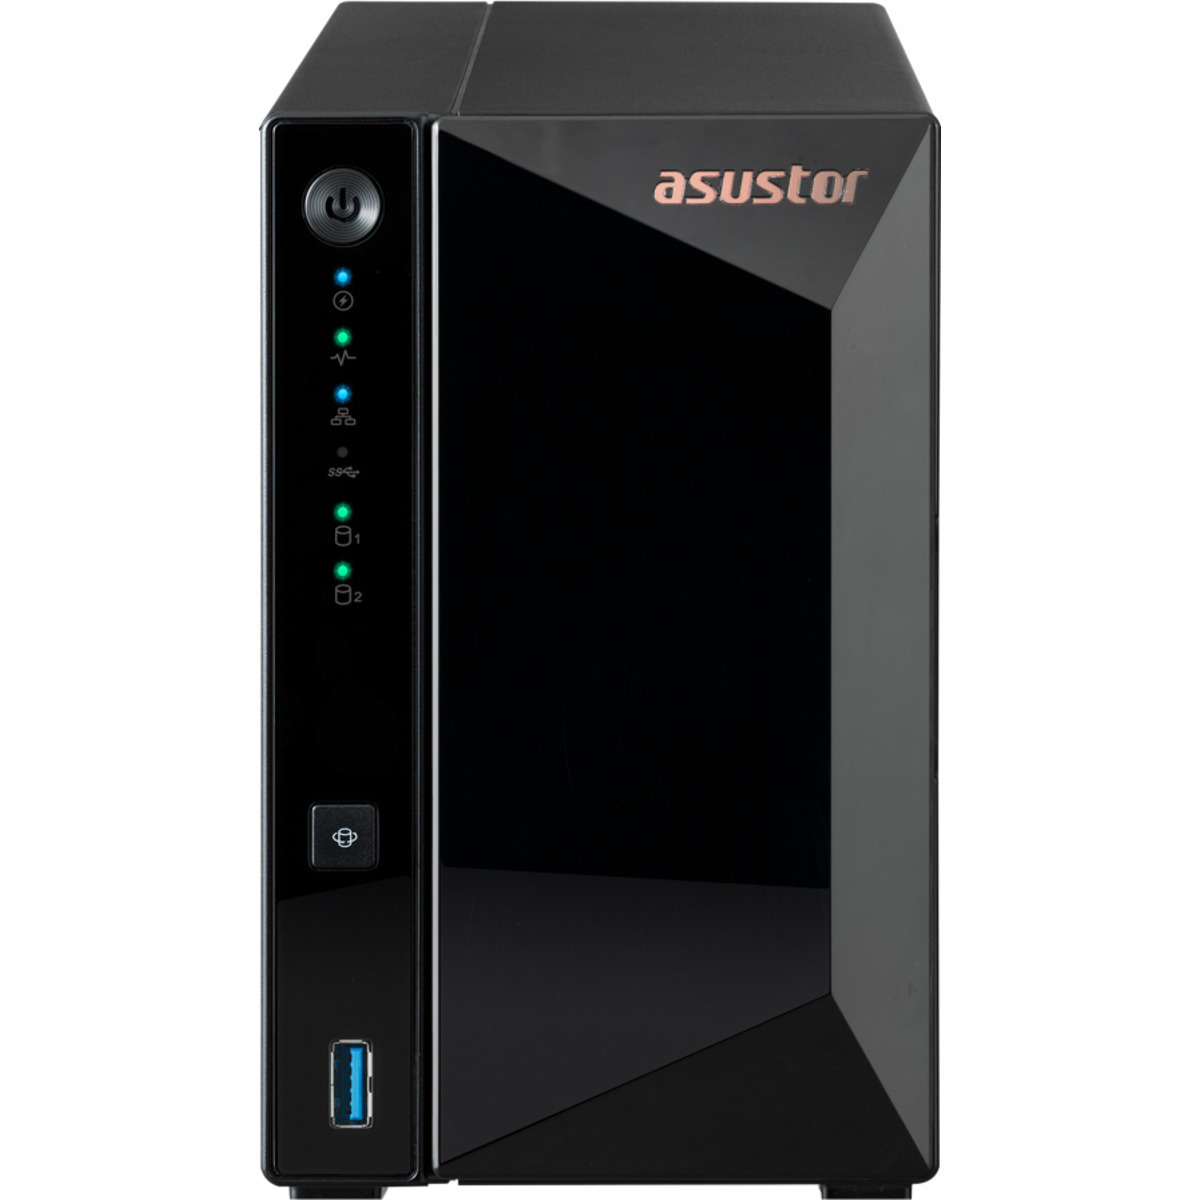 ASUSTOR DRIVESTOR 2 Pro AS3302T 6tb 2-Bay Desktop Personal / Basic Home / Small Office NAS - Network Attached Storage Device 1x6tb Western Digital Red Plus WD60EFPX 3.5 5640rpm SATA 6Gb/s HDD NAS Class Drives Installed - Burn-In Tested DRIVESTOR 2 Pro AS3302T